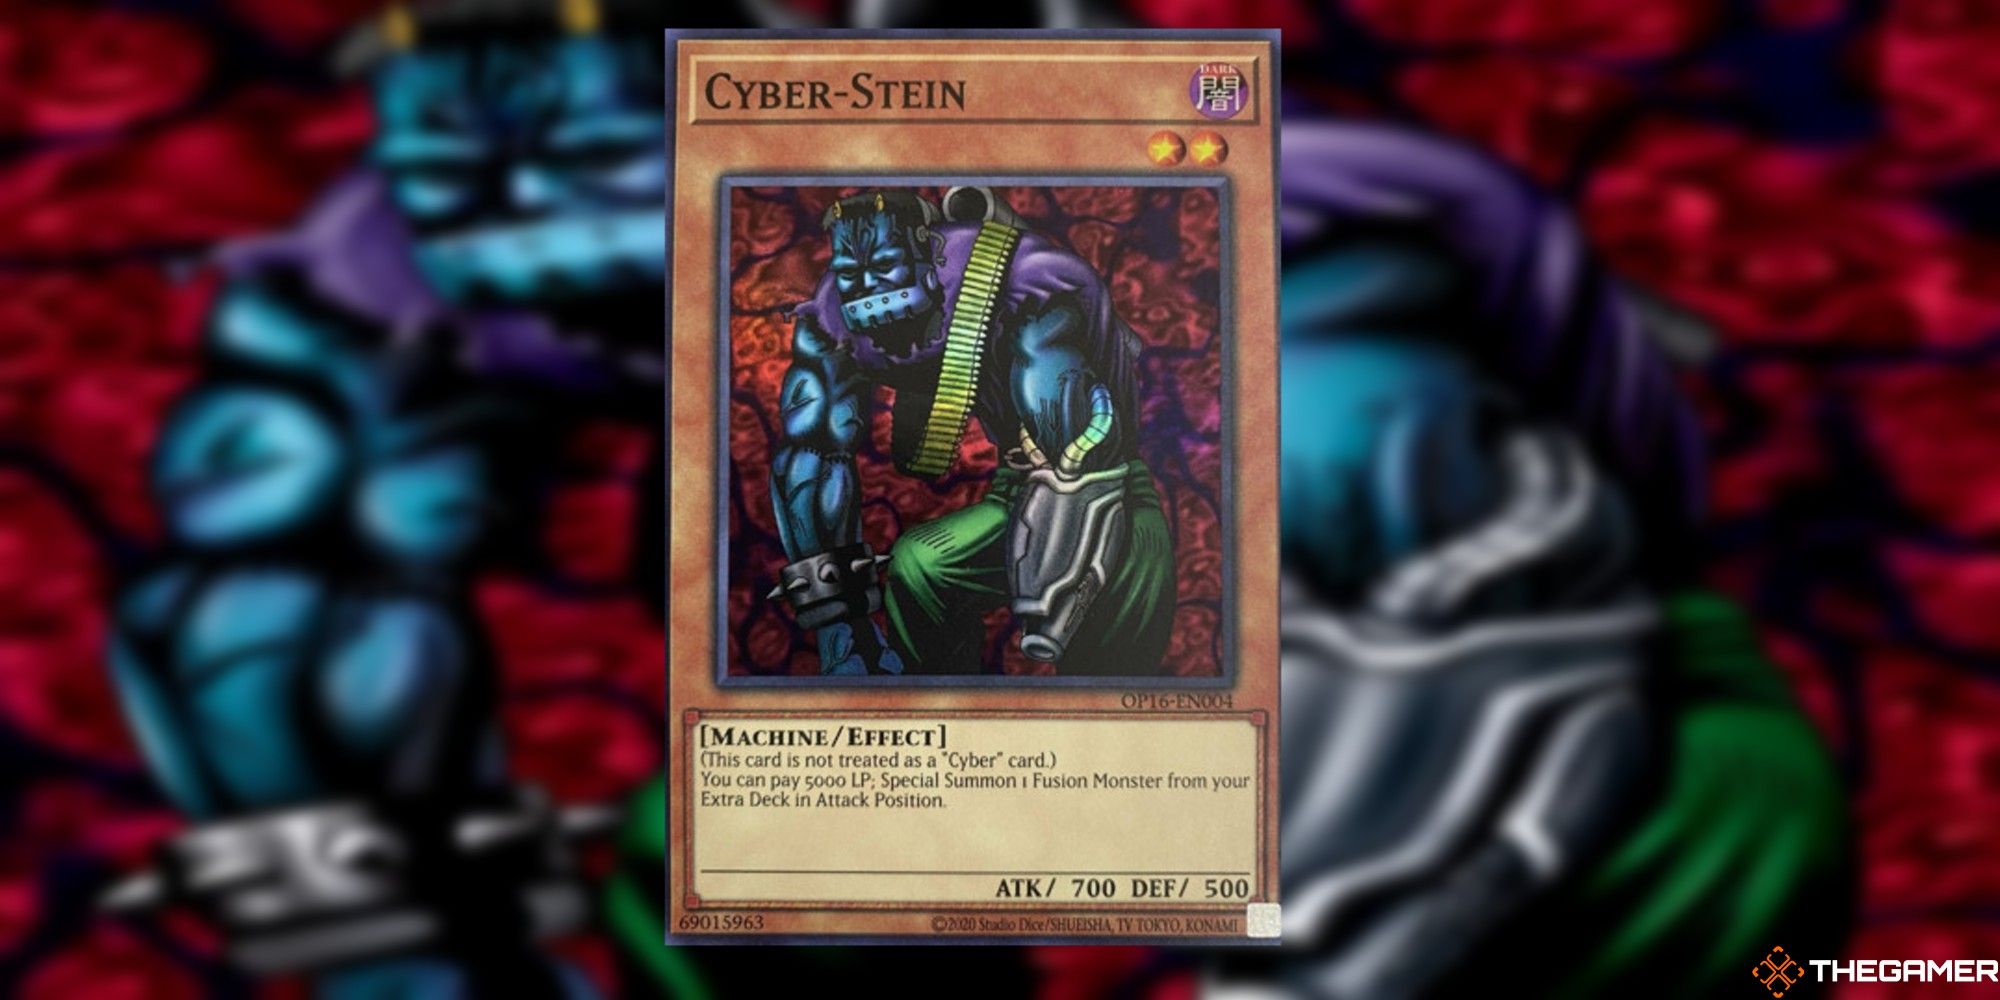 cyber-stein card and art background